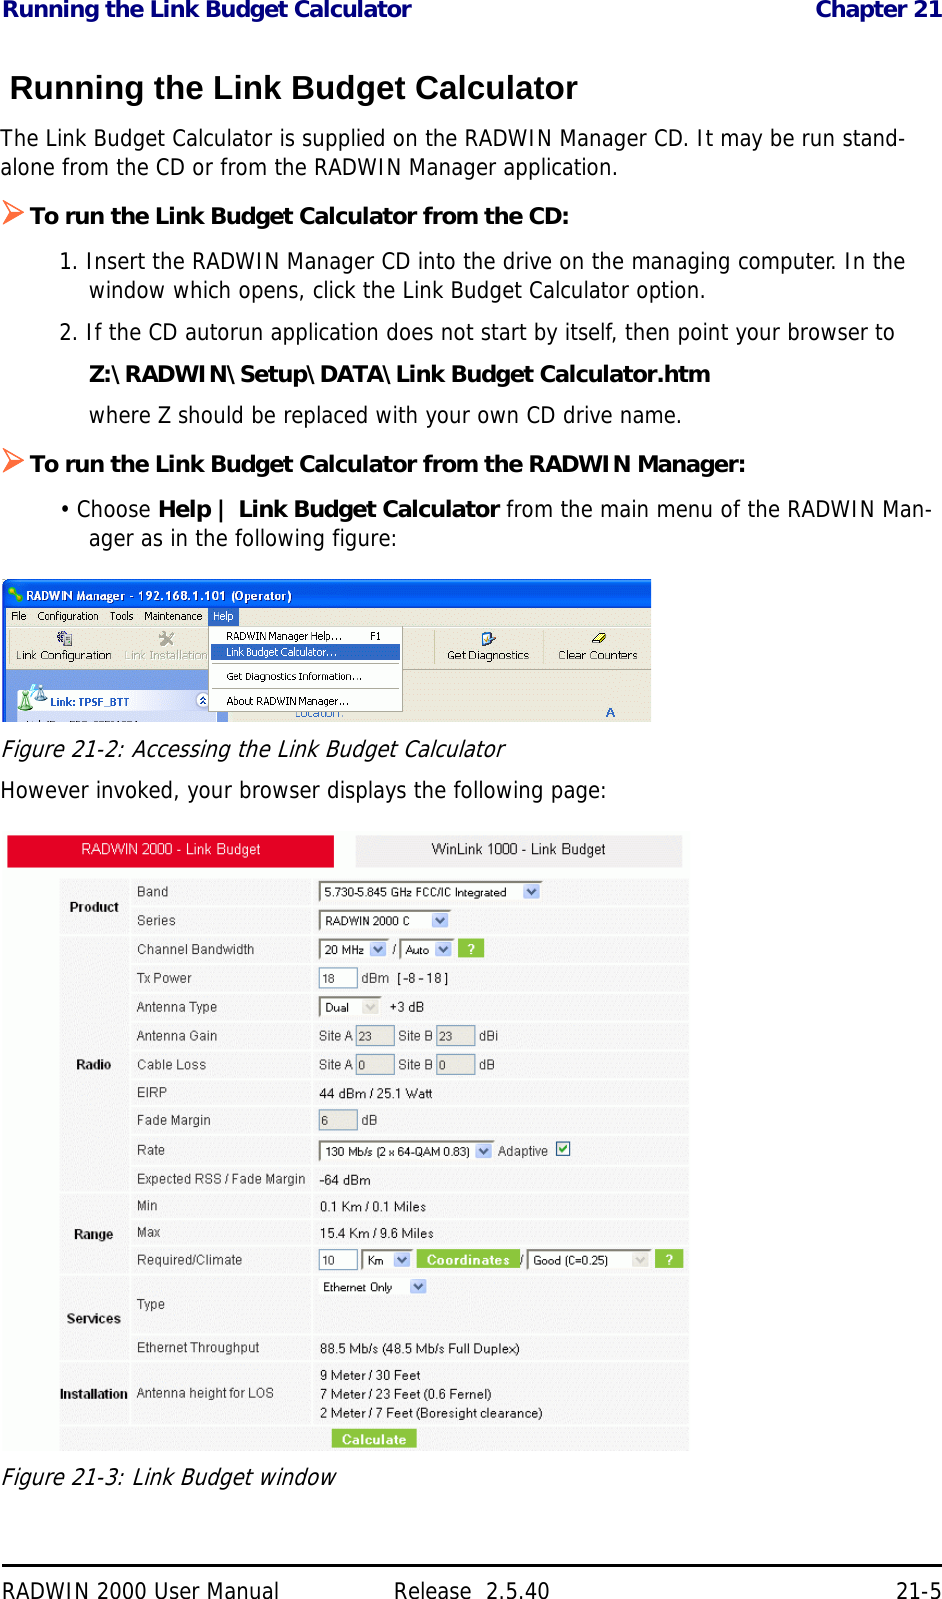 Running the Link Budget Calculator Chapter 21RADWIN 2000 User Manual Release  2.5.40 21-5 Running the Link Budget CalculatorThe Link Budget Calculator is supplied on the RADWIN Manager CD. It may be run stand-alone from the CD or from the RADWIN Manager application.To run the Link Budget Calculator from the CD:1. Insert the RADWIN Manager CD into the drive on the managing computer. In the window which opens, click the Link Budget Calculator option.2. If the CD autorun application does not start by itself, then point your browser toZ:\RADWIN\Setup\DATA\Link Budget Calculator.htmwhere Z should be replaced with your own CD drive name.To run the Link Budget Calculator from the RADWIN Manager:• Choose Help | Link Budget Calculator from the main menu of the RADWIN Man-ager as in the following figure:Figure 21-2: Accessing the Link Budget CalculatorHowever invoked, your browser displays the following page:Figure 21-3: Link Budget window